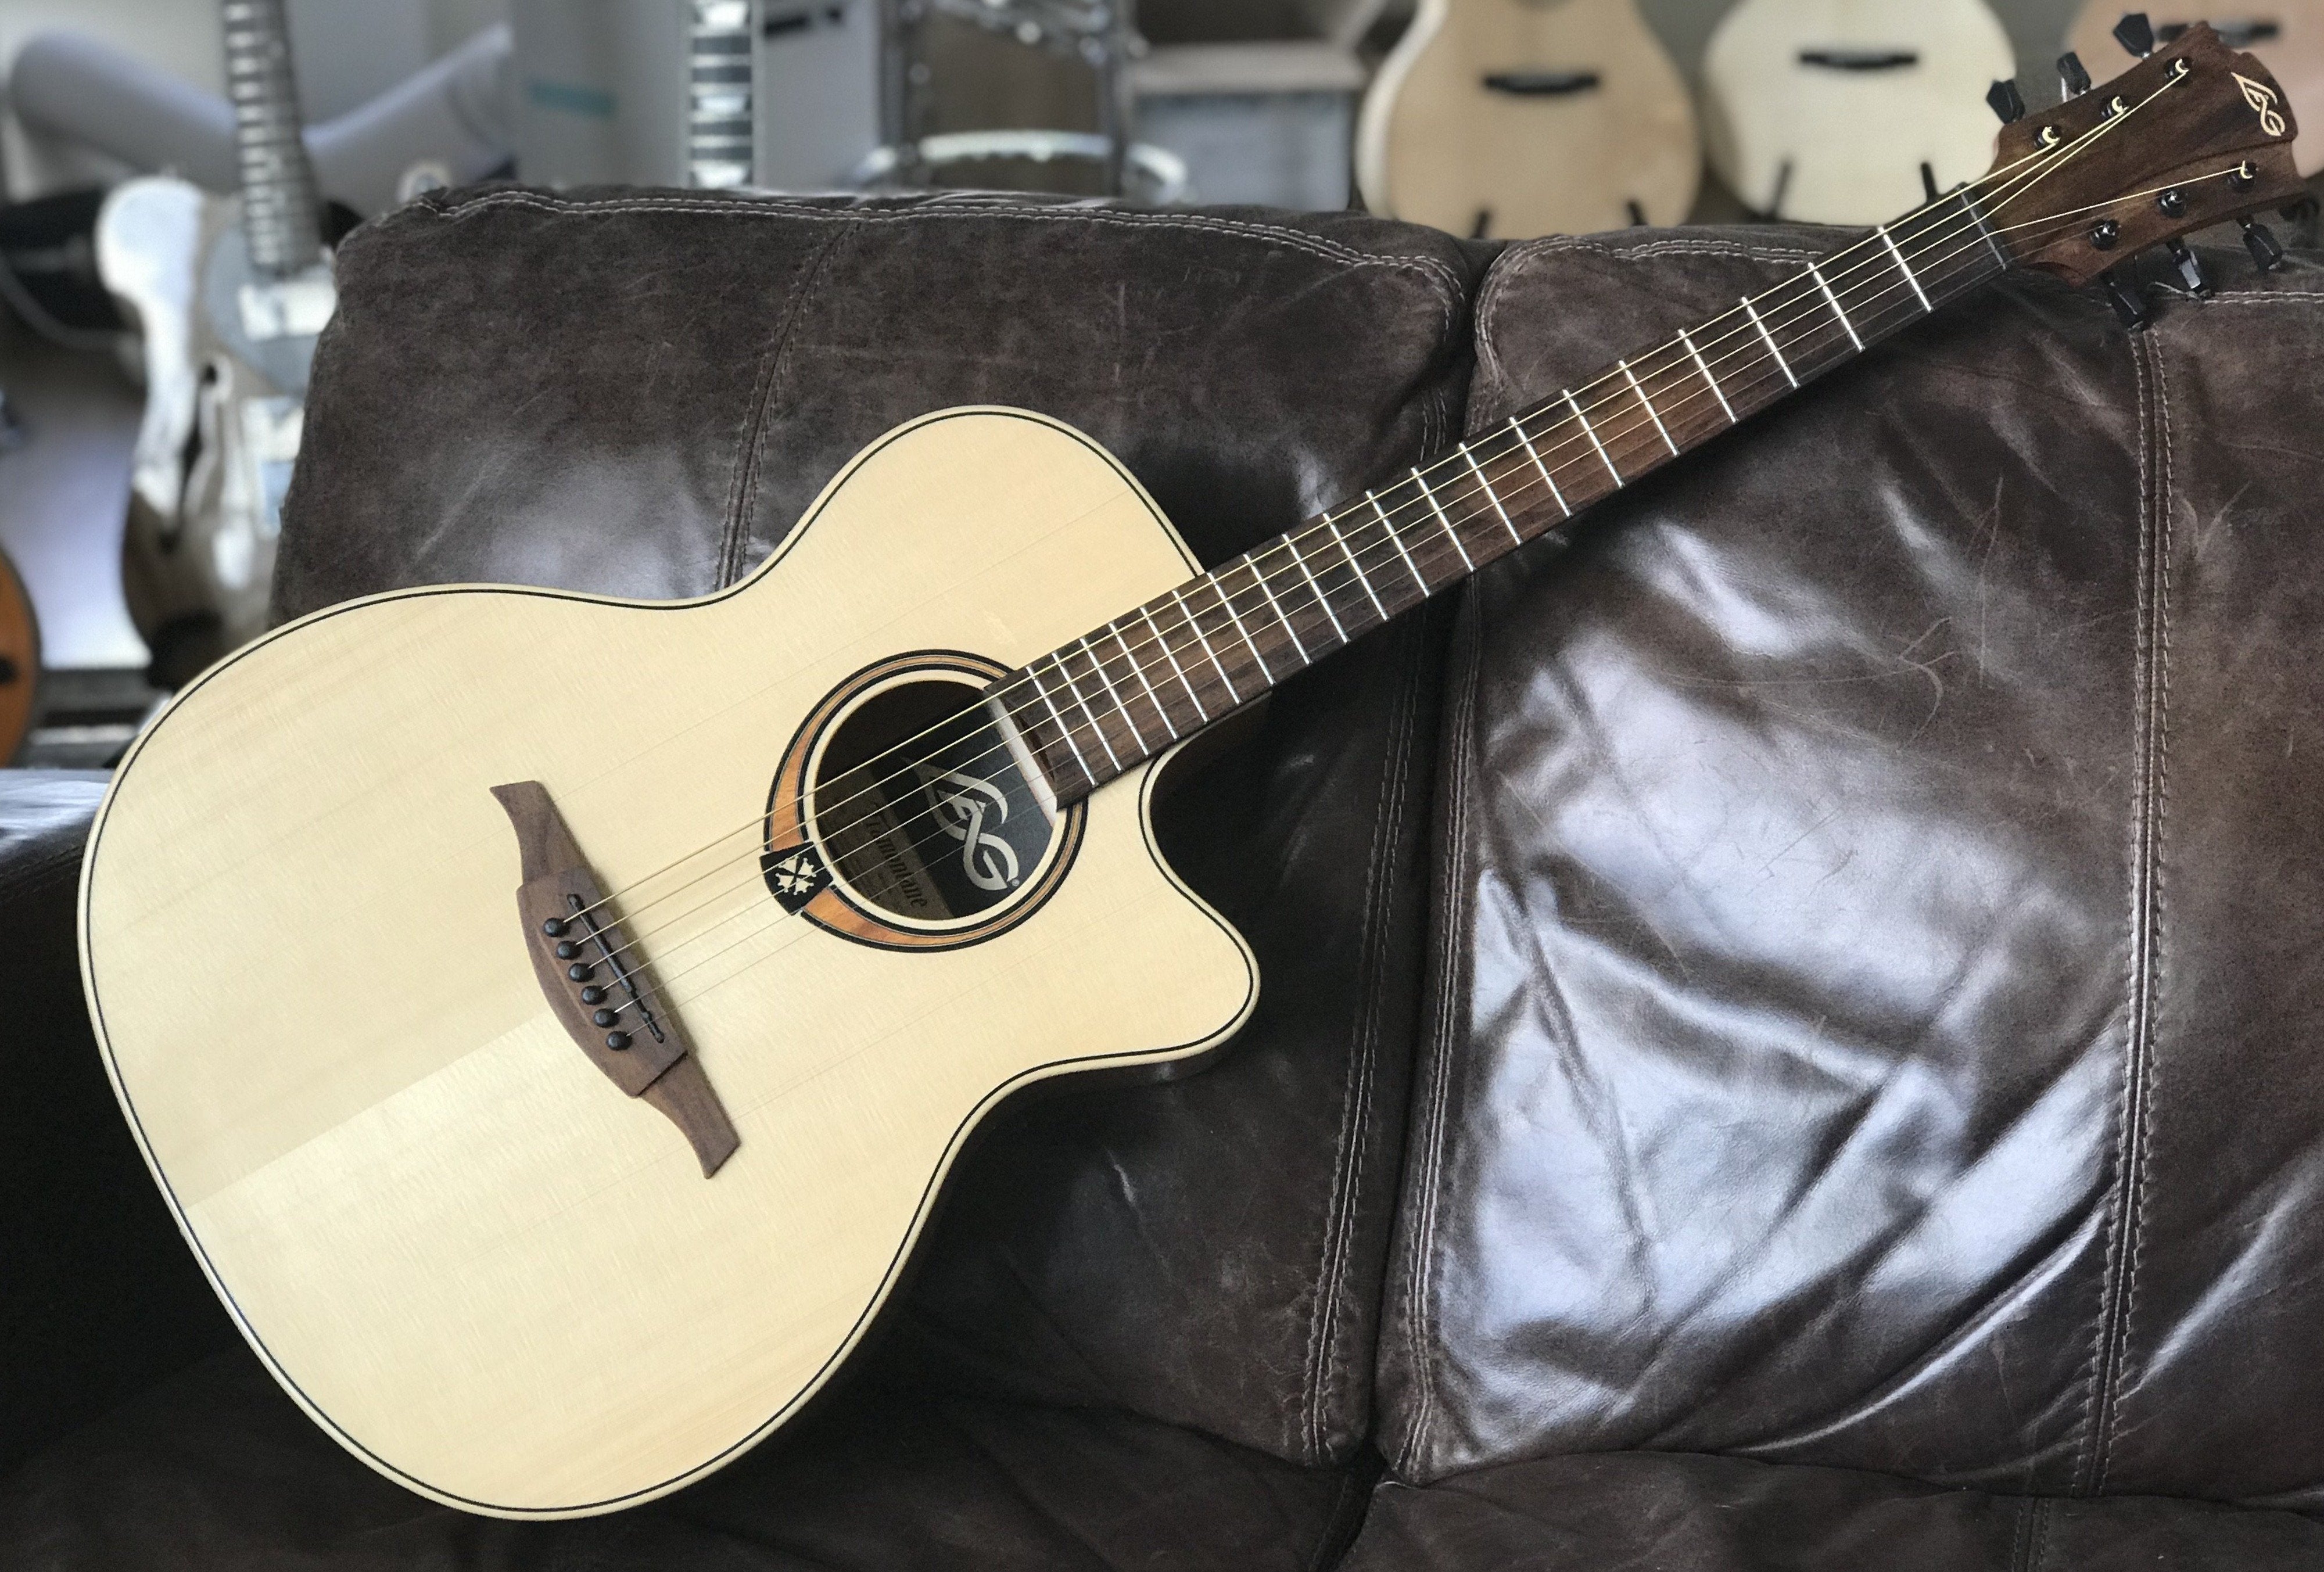 LAG TRAMONTANE 88 T88ACE AUDITORIUM CUTAWAY ELECTRO, Electro Acoustic Guitar for sale at Richards Guitars.